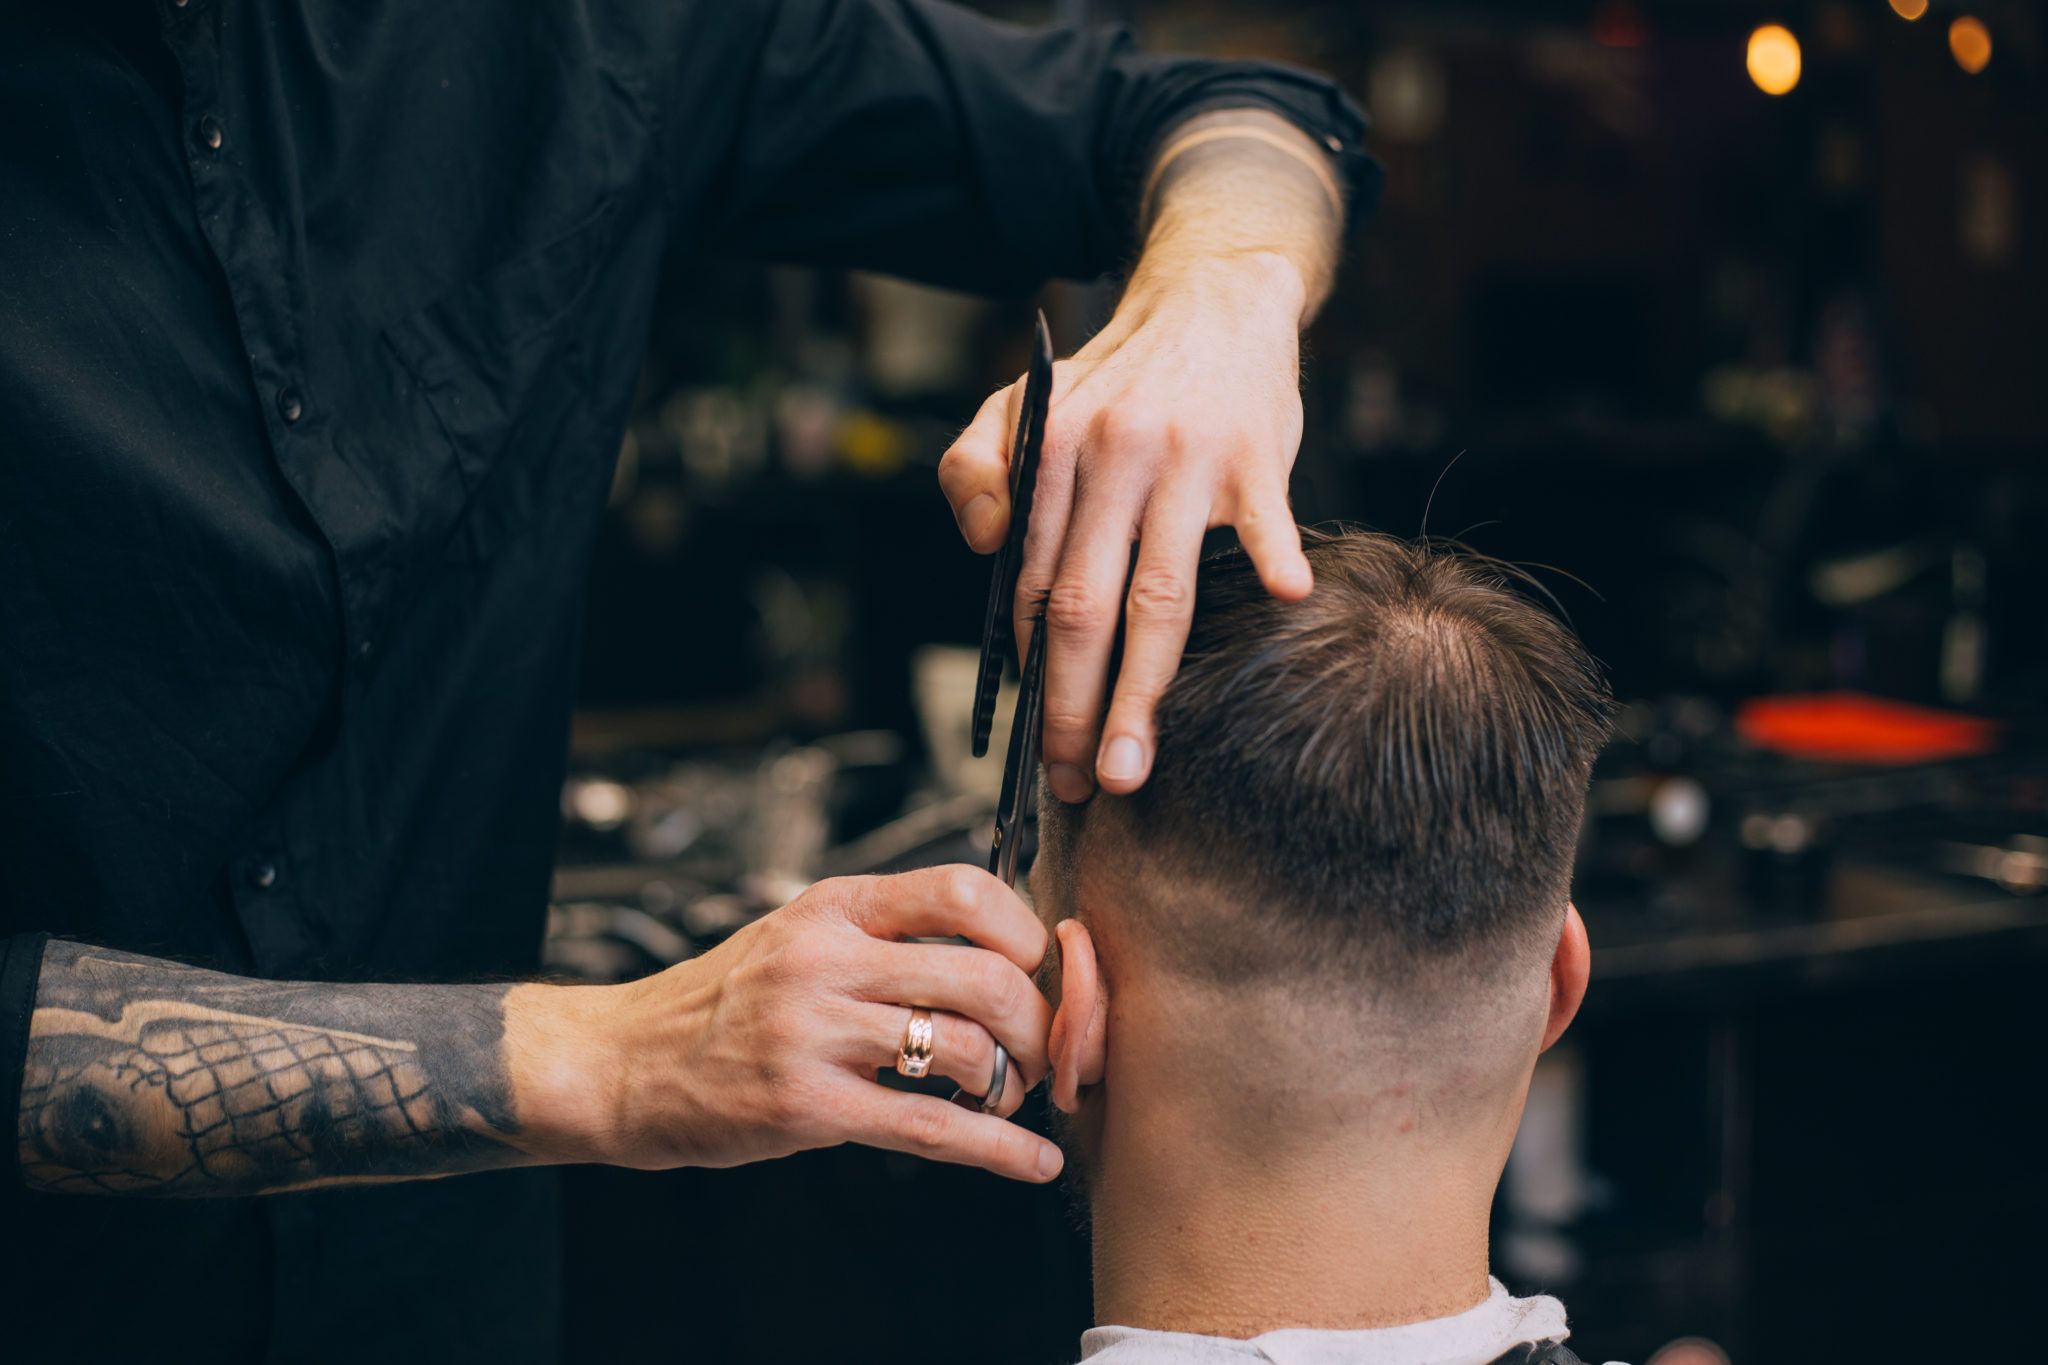 Black market haircuts 'booming' according to one Dublin hairdresser